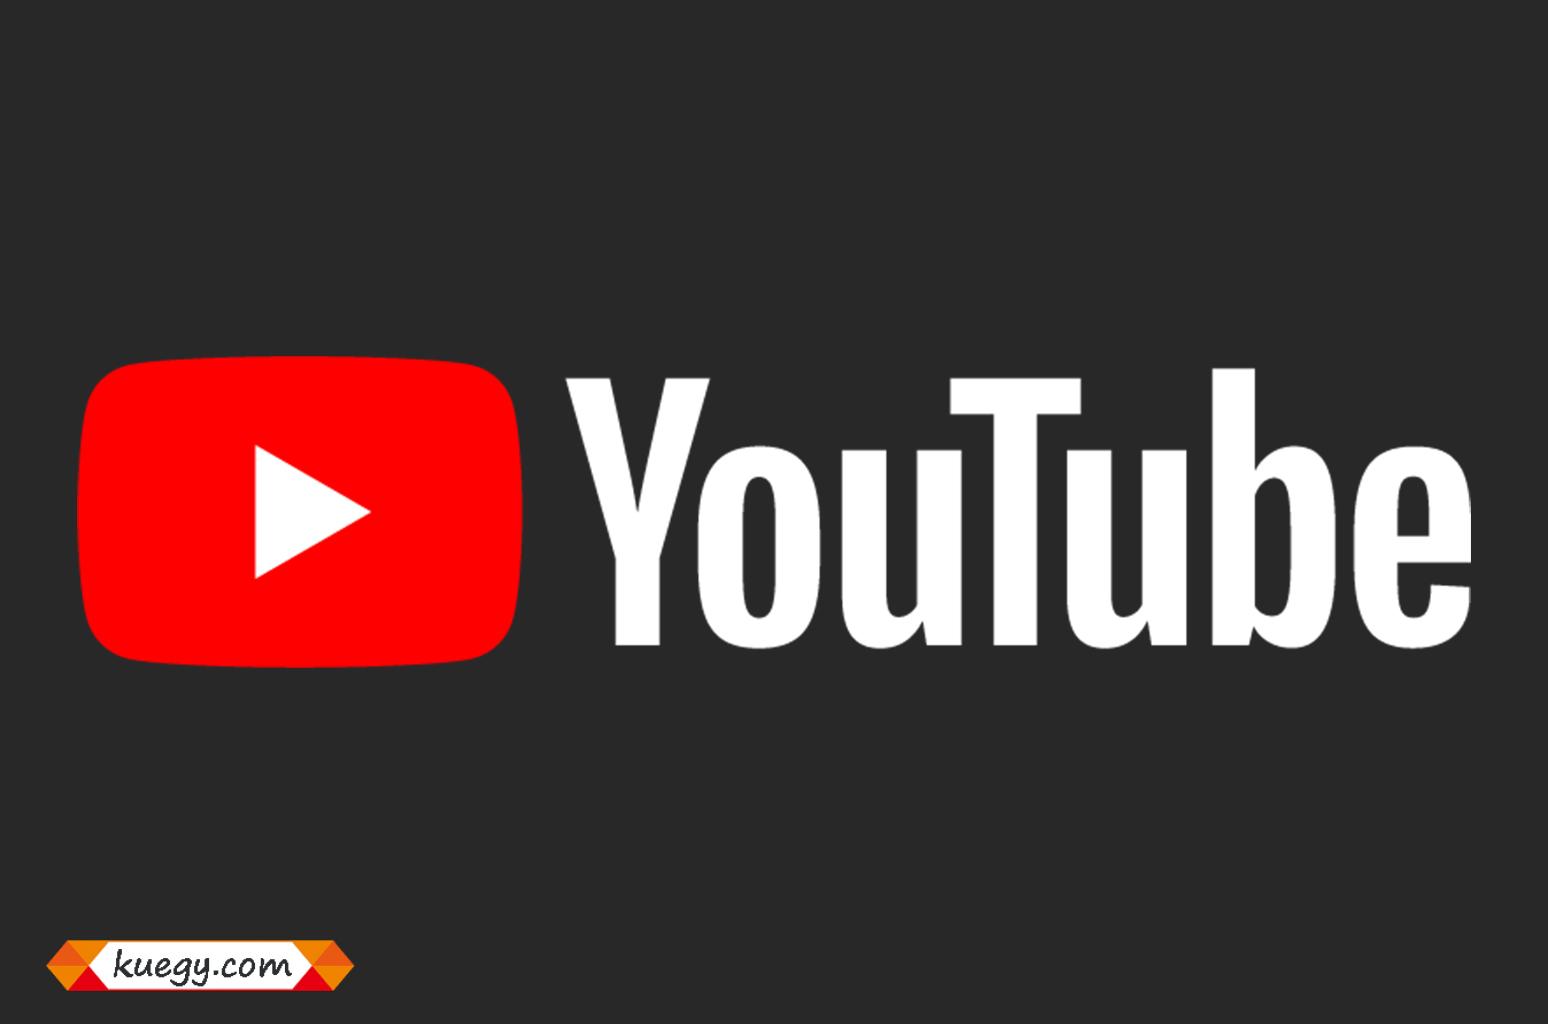 Download the list of YouTube videos using more than one website